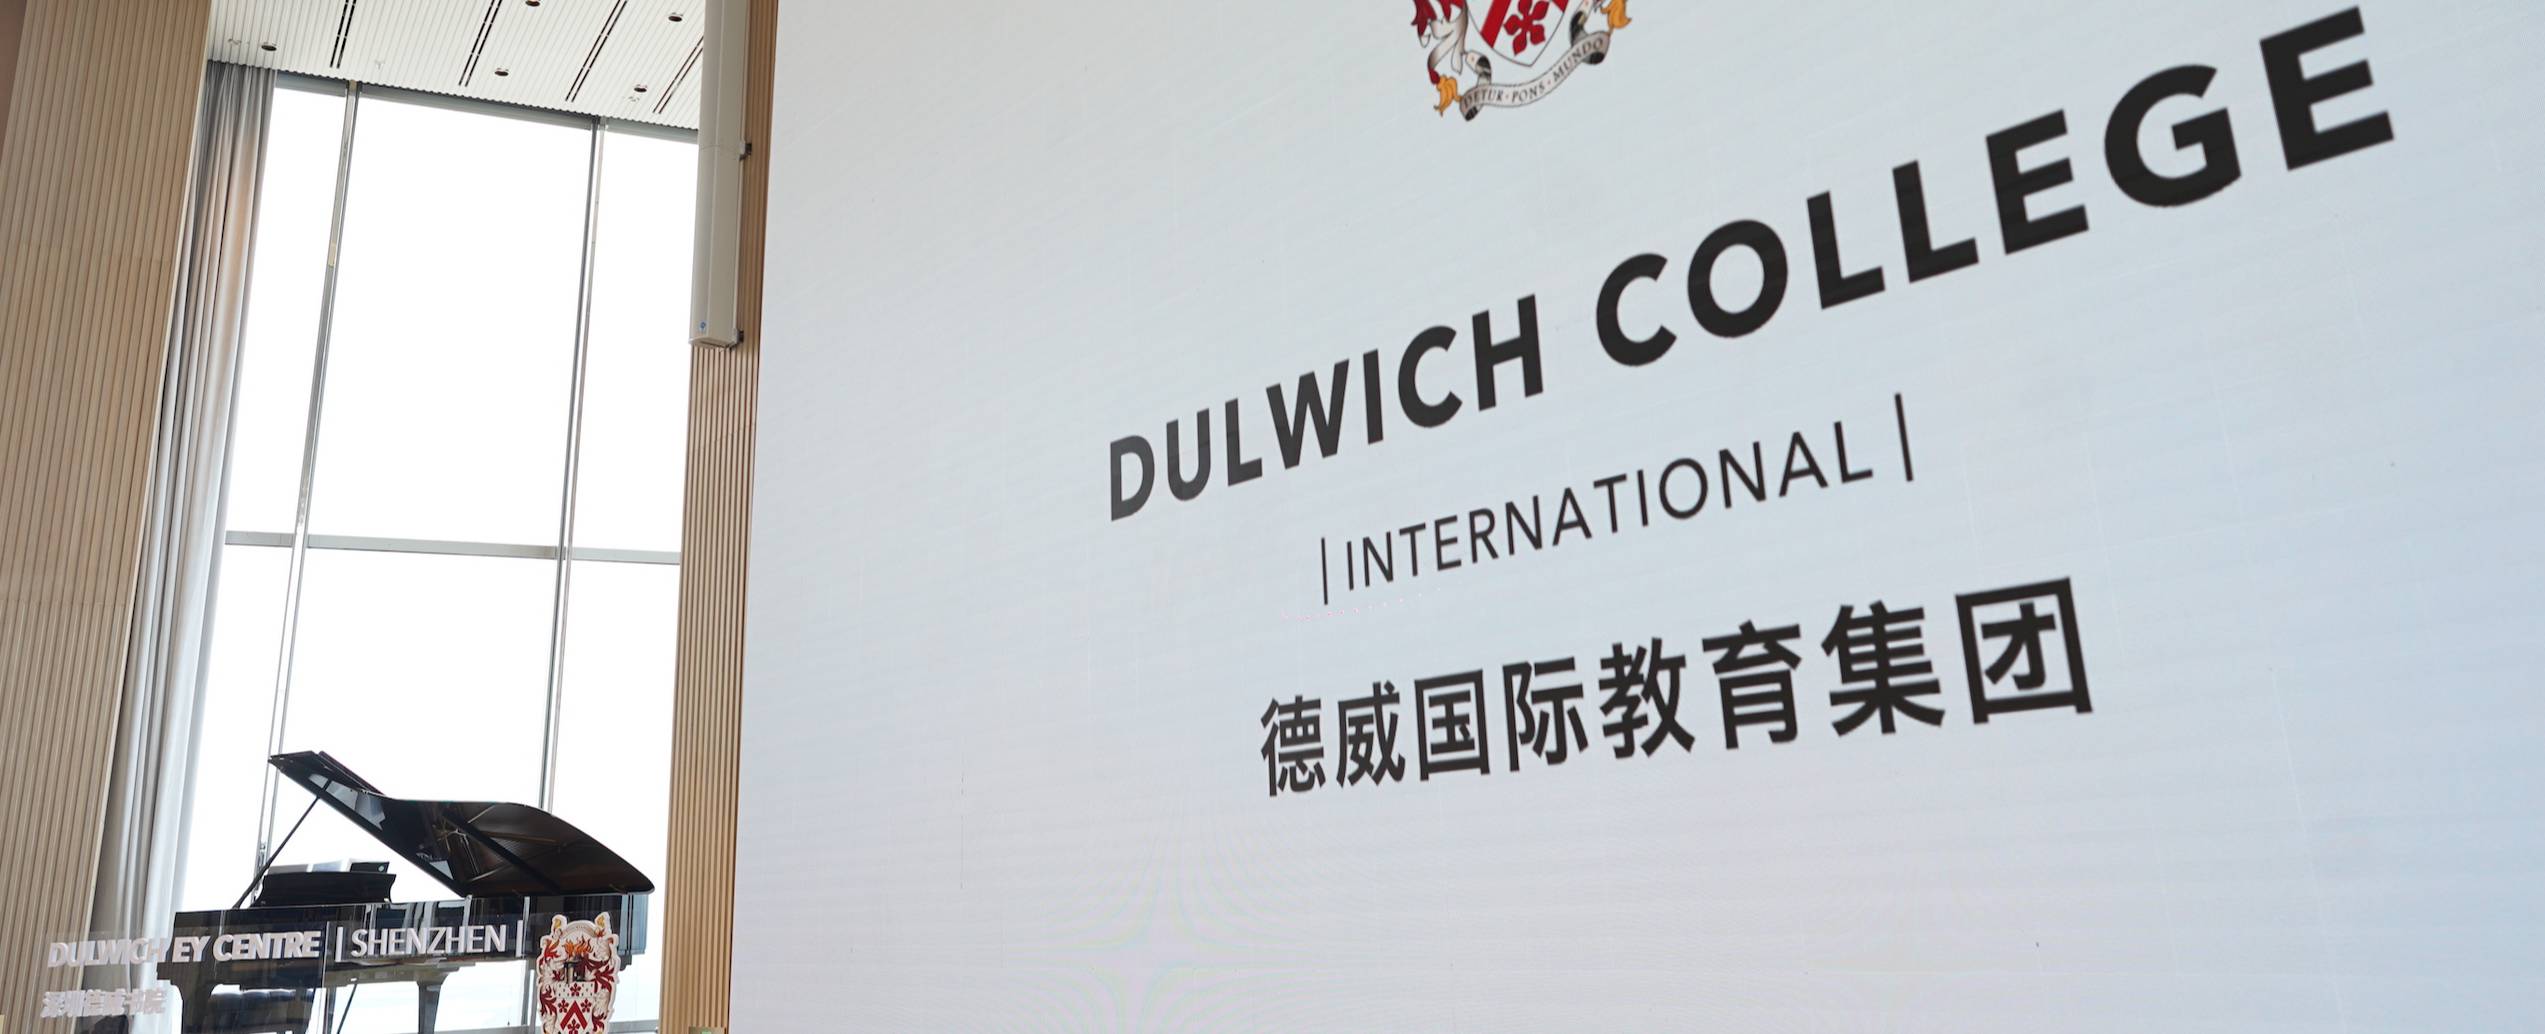 dulwich-college-international-event-at-sky-concert-hall-lowres-20210609-153715-758